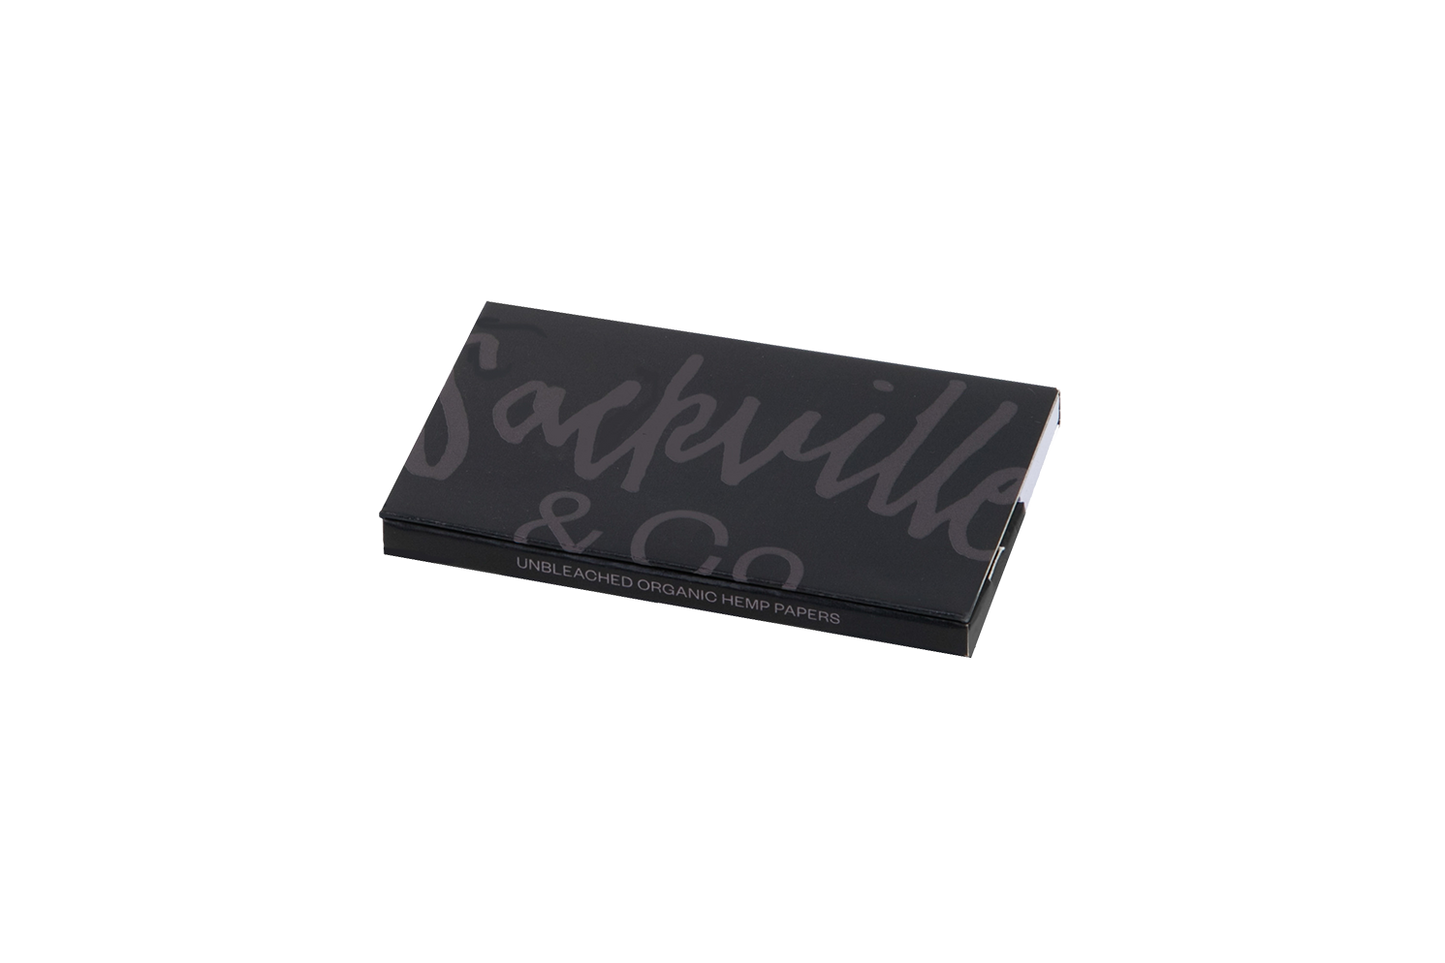 CASE - BLACK ROLLING PAPERS - Sackville & Co.